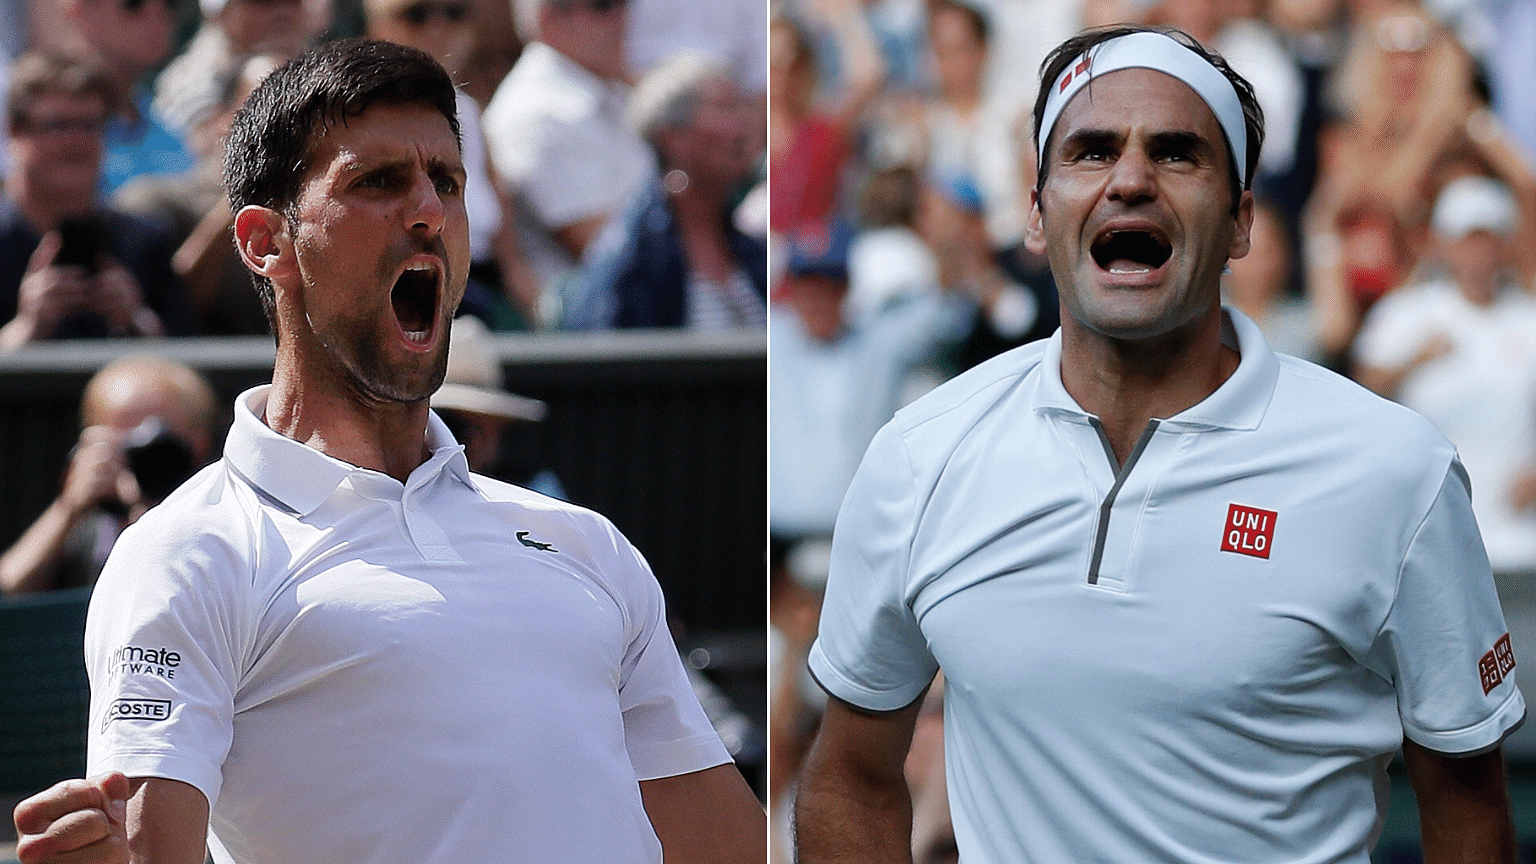 Roger Federer (R) will play Novak Djokovic (L) in the men’s singles final of the Wimbledon on Sunday, 14 July.